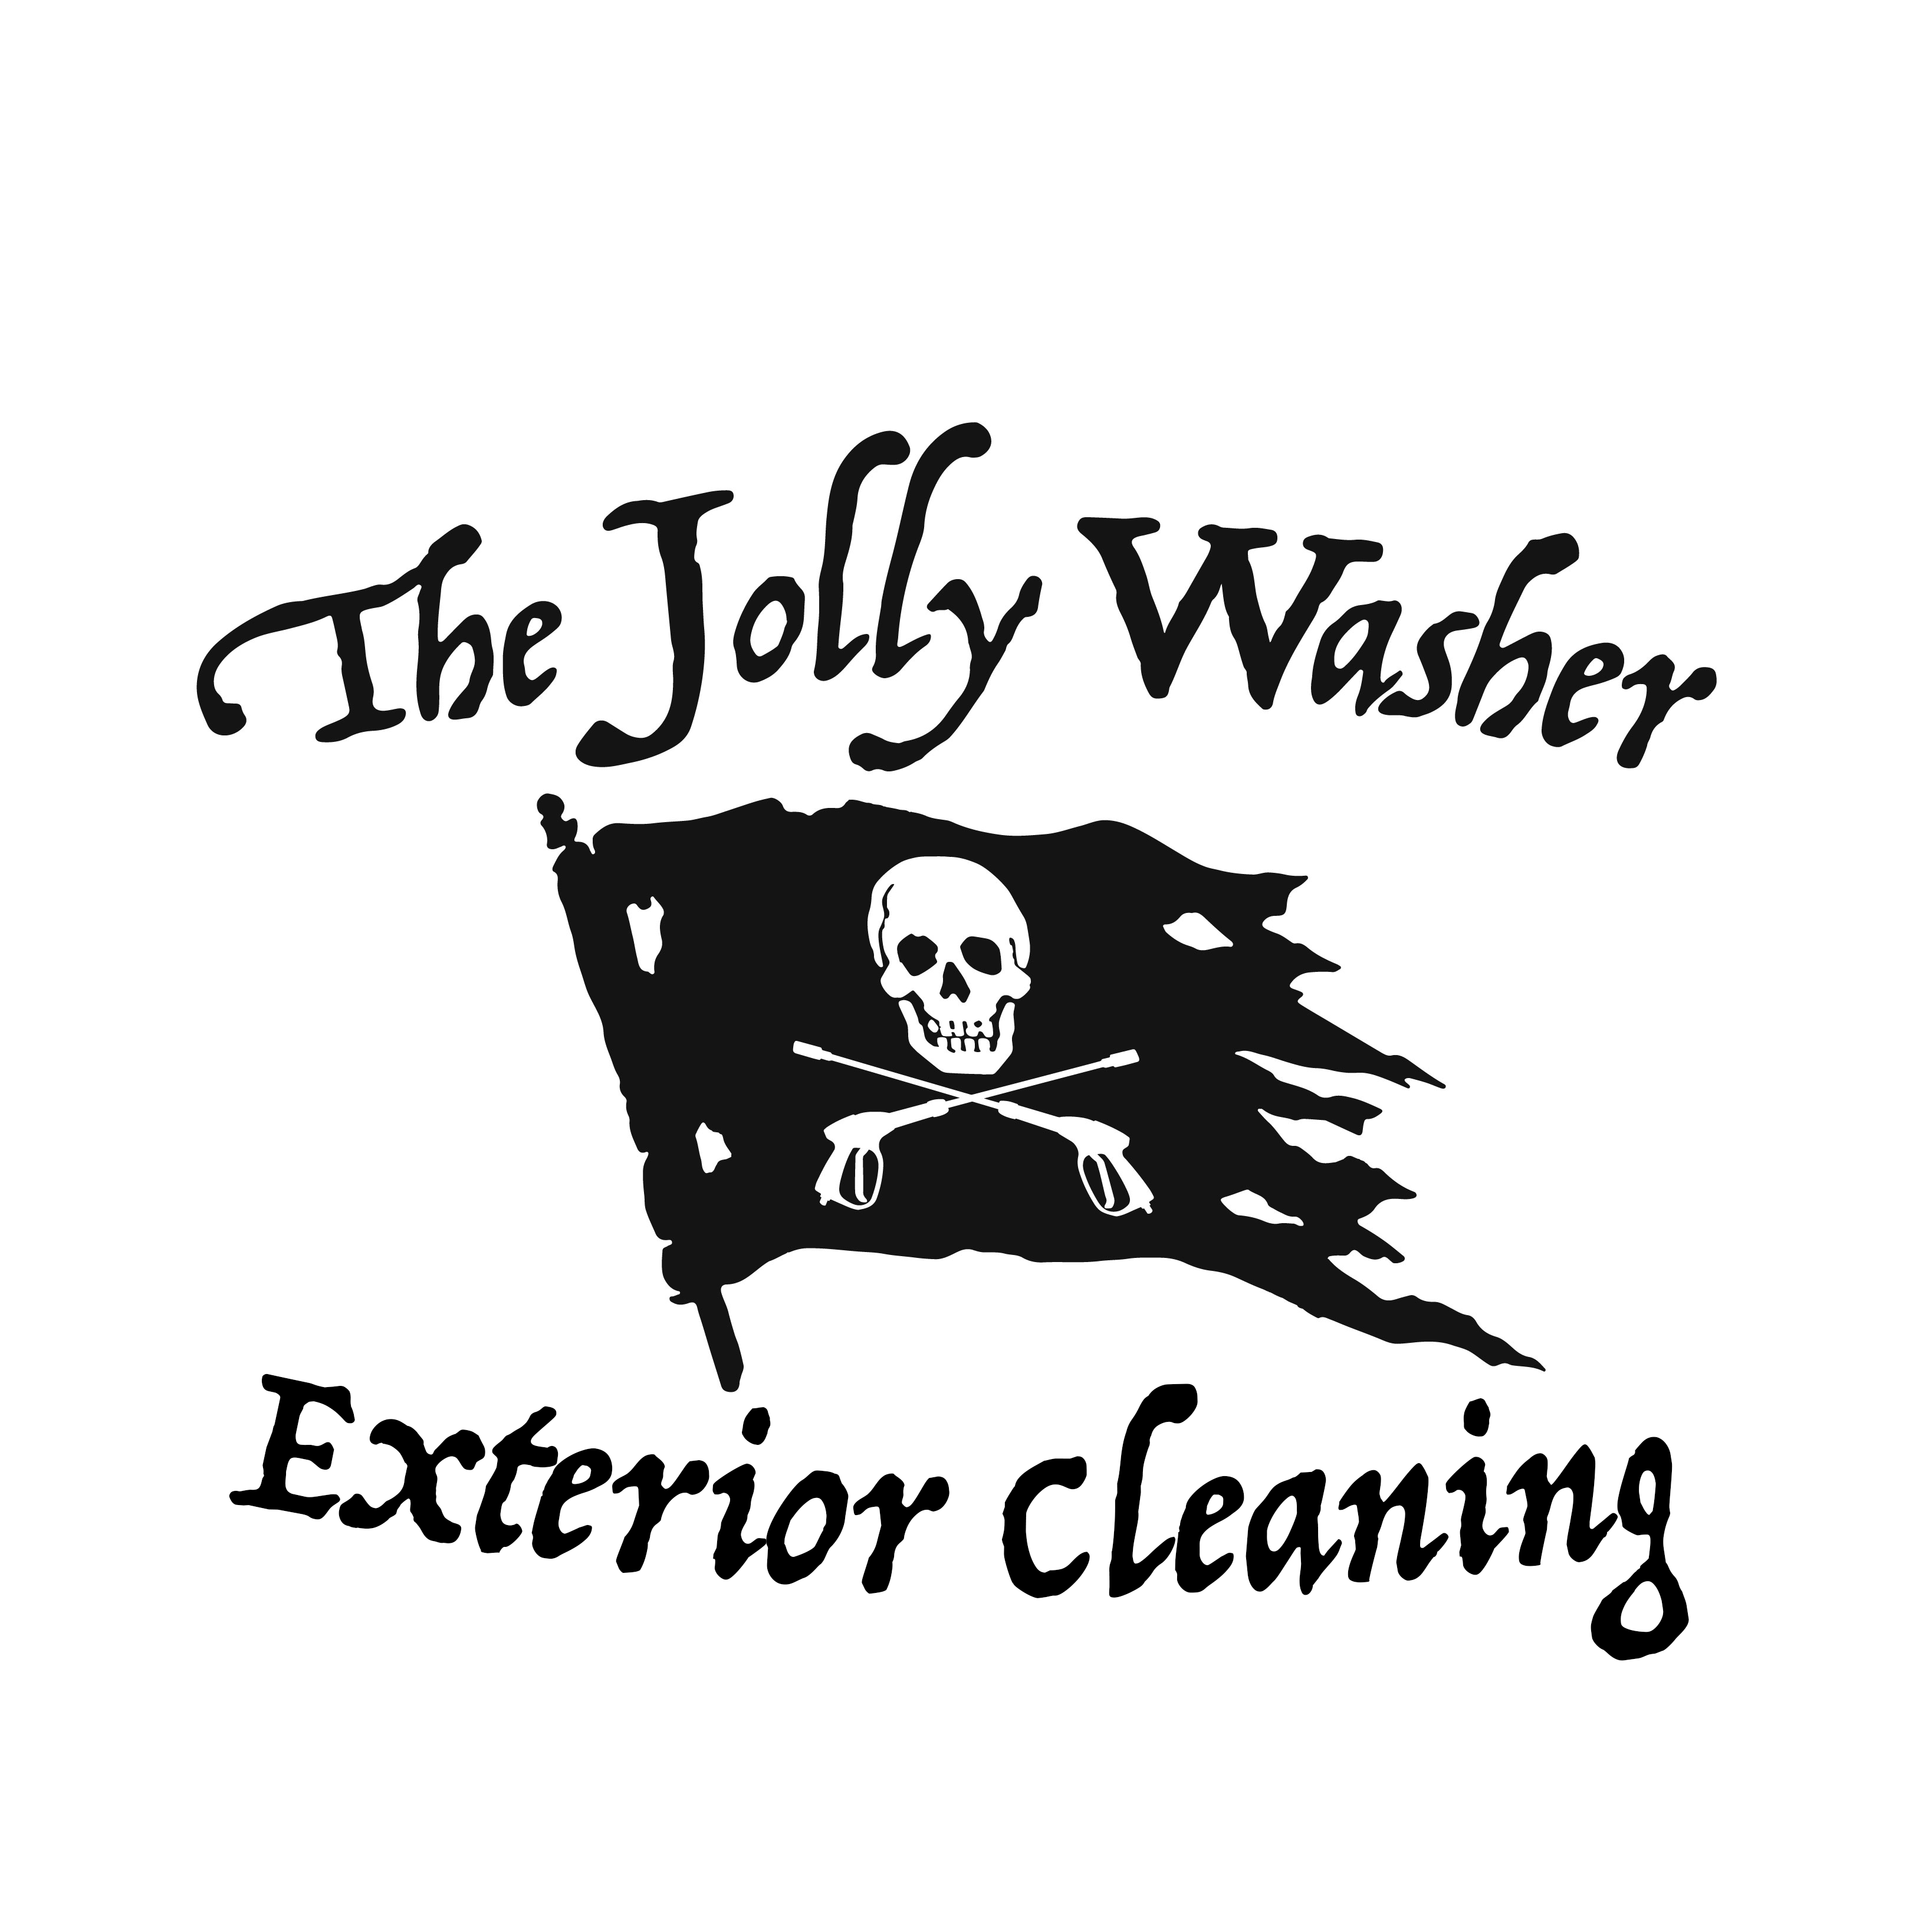 The Jolly Washer